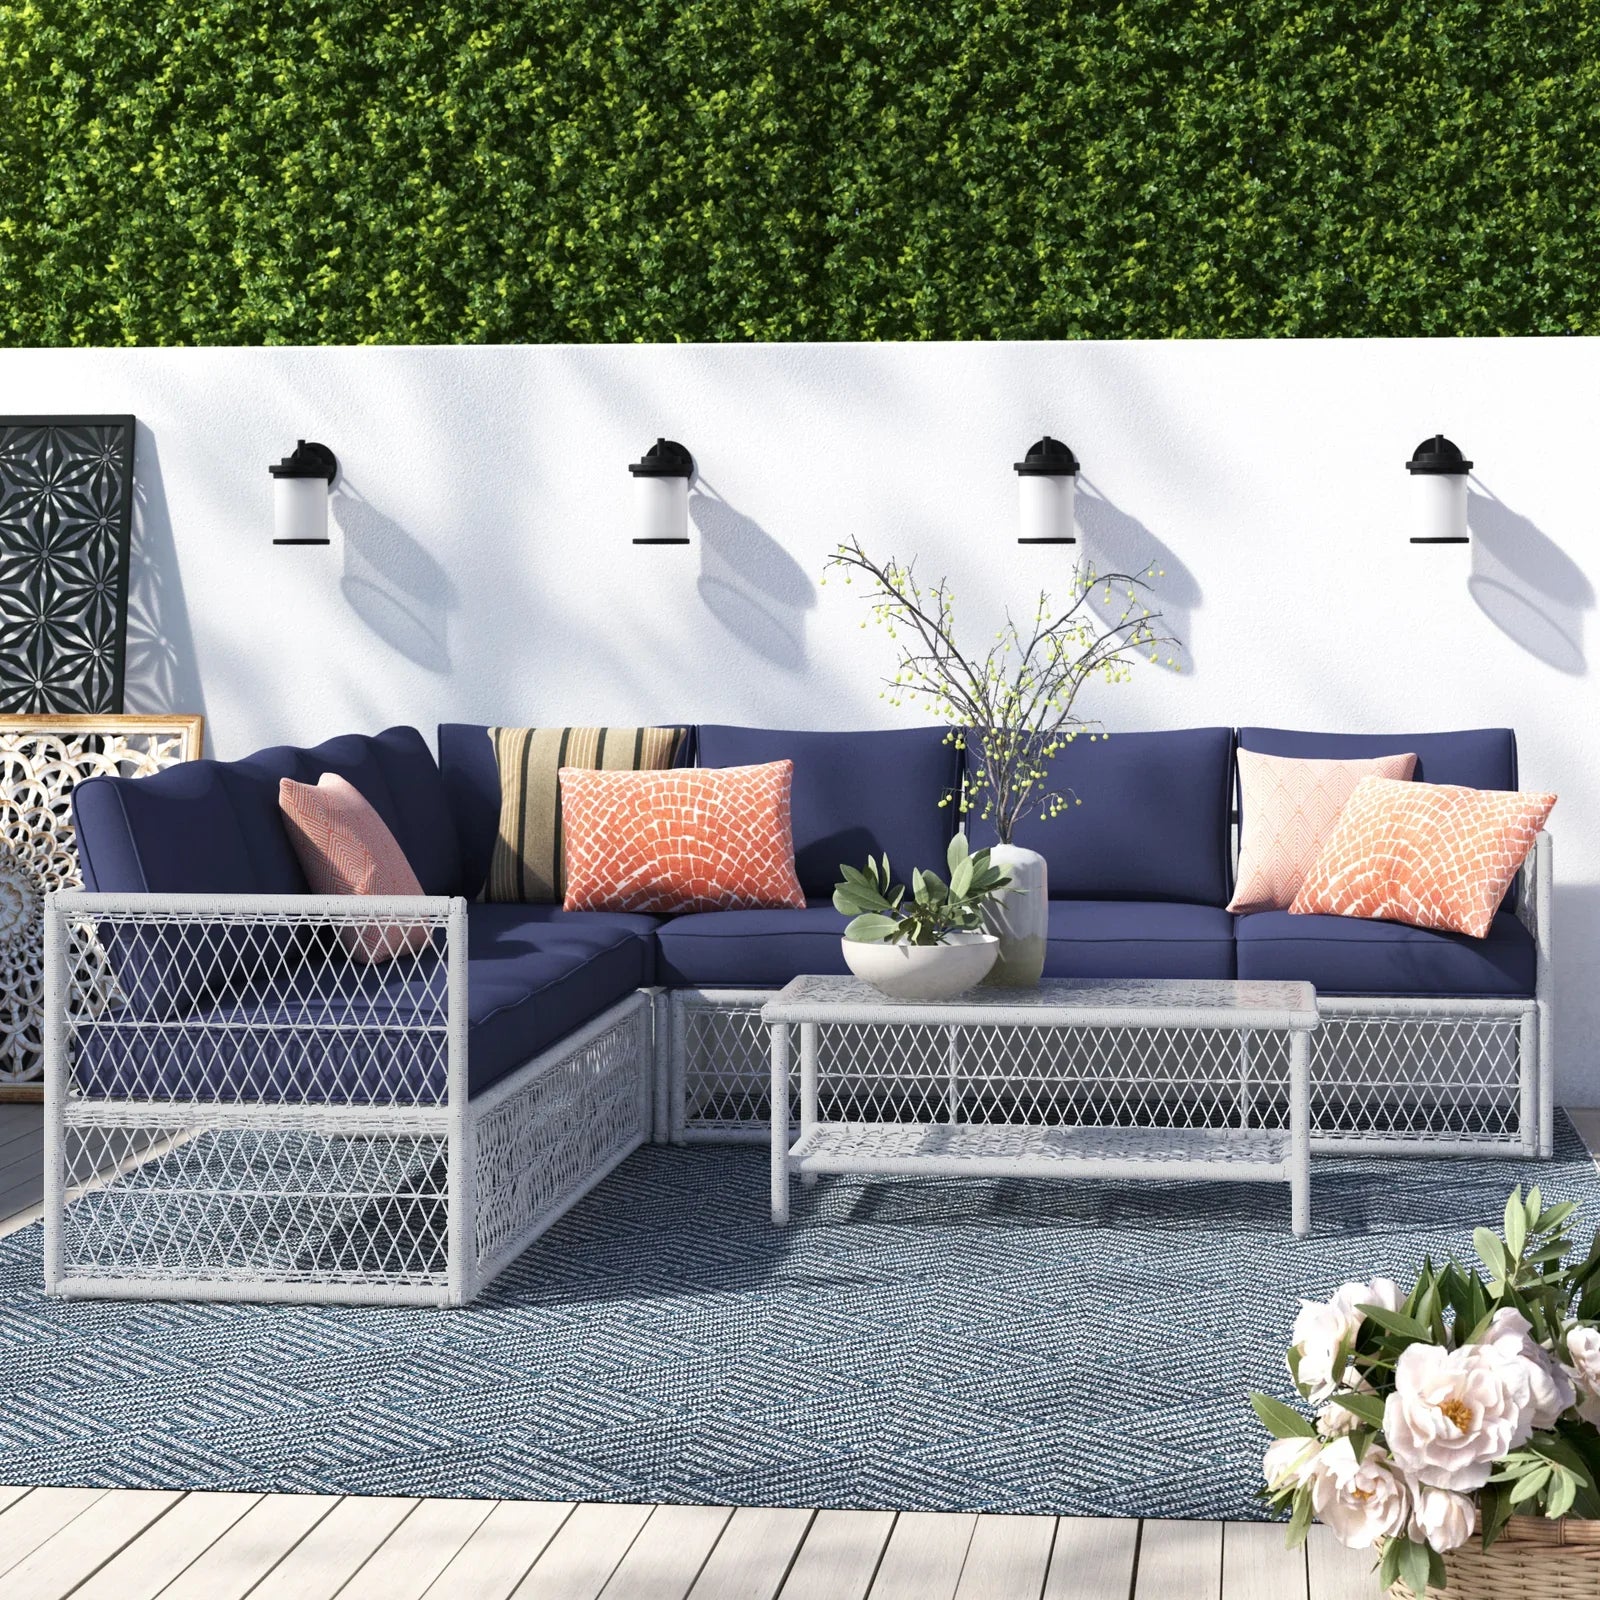 FURNIZY OUTDOOR SOFA SET 7 SEATER AND 1 CENTER TABLE